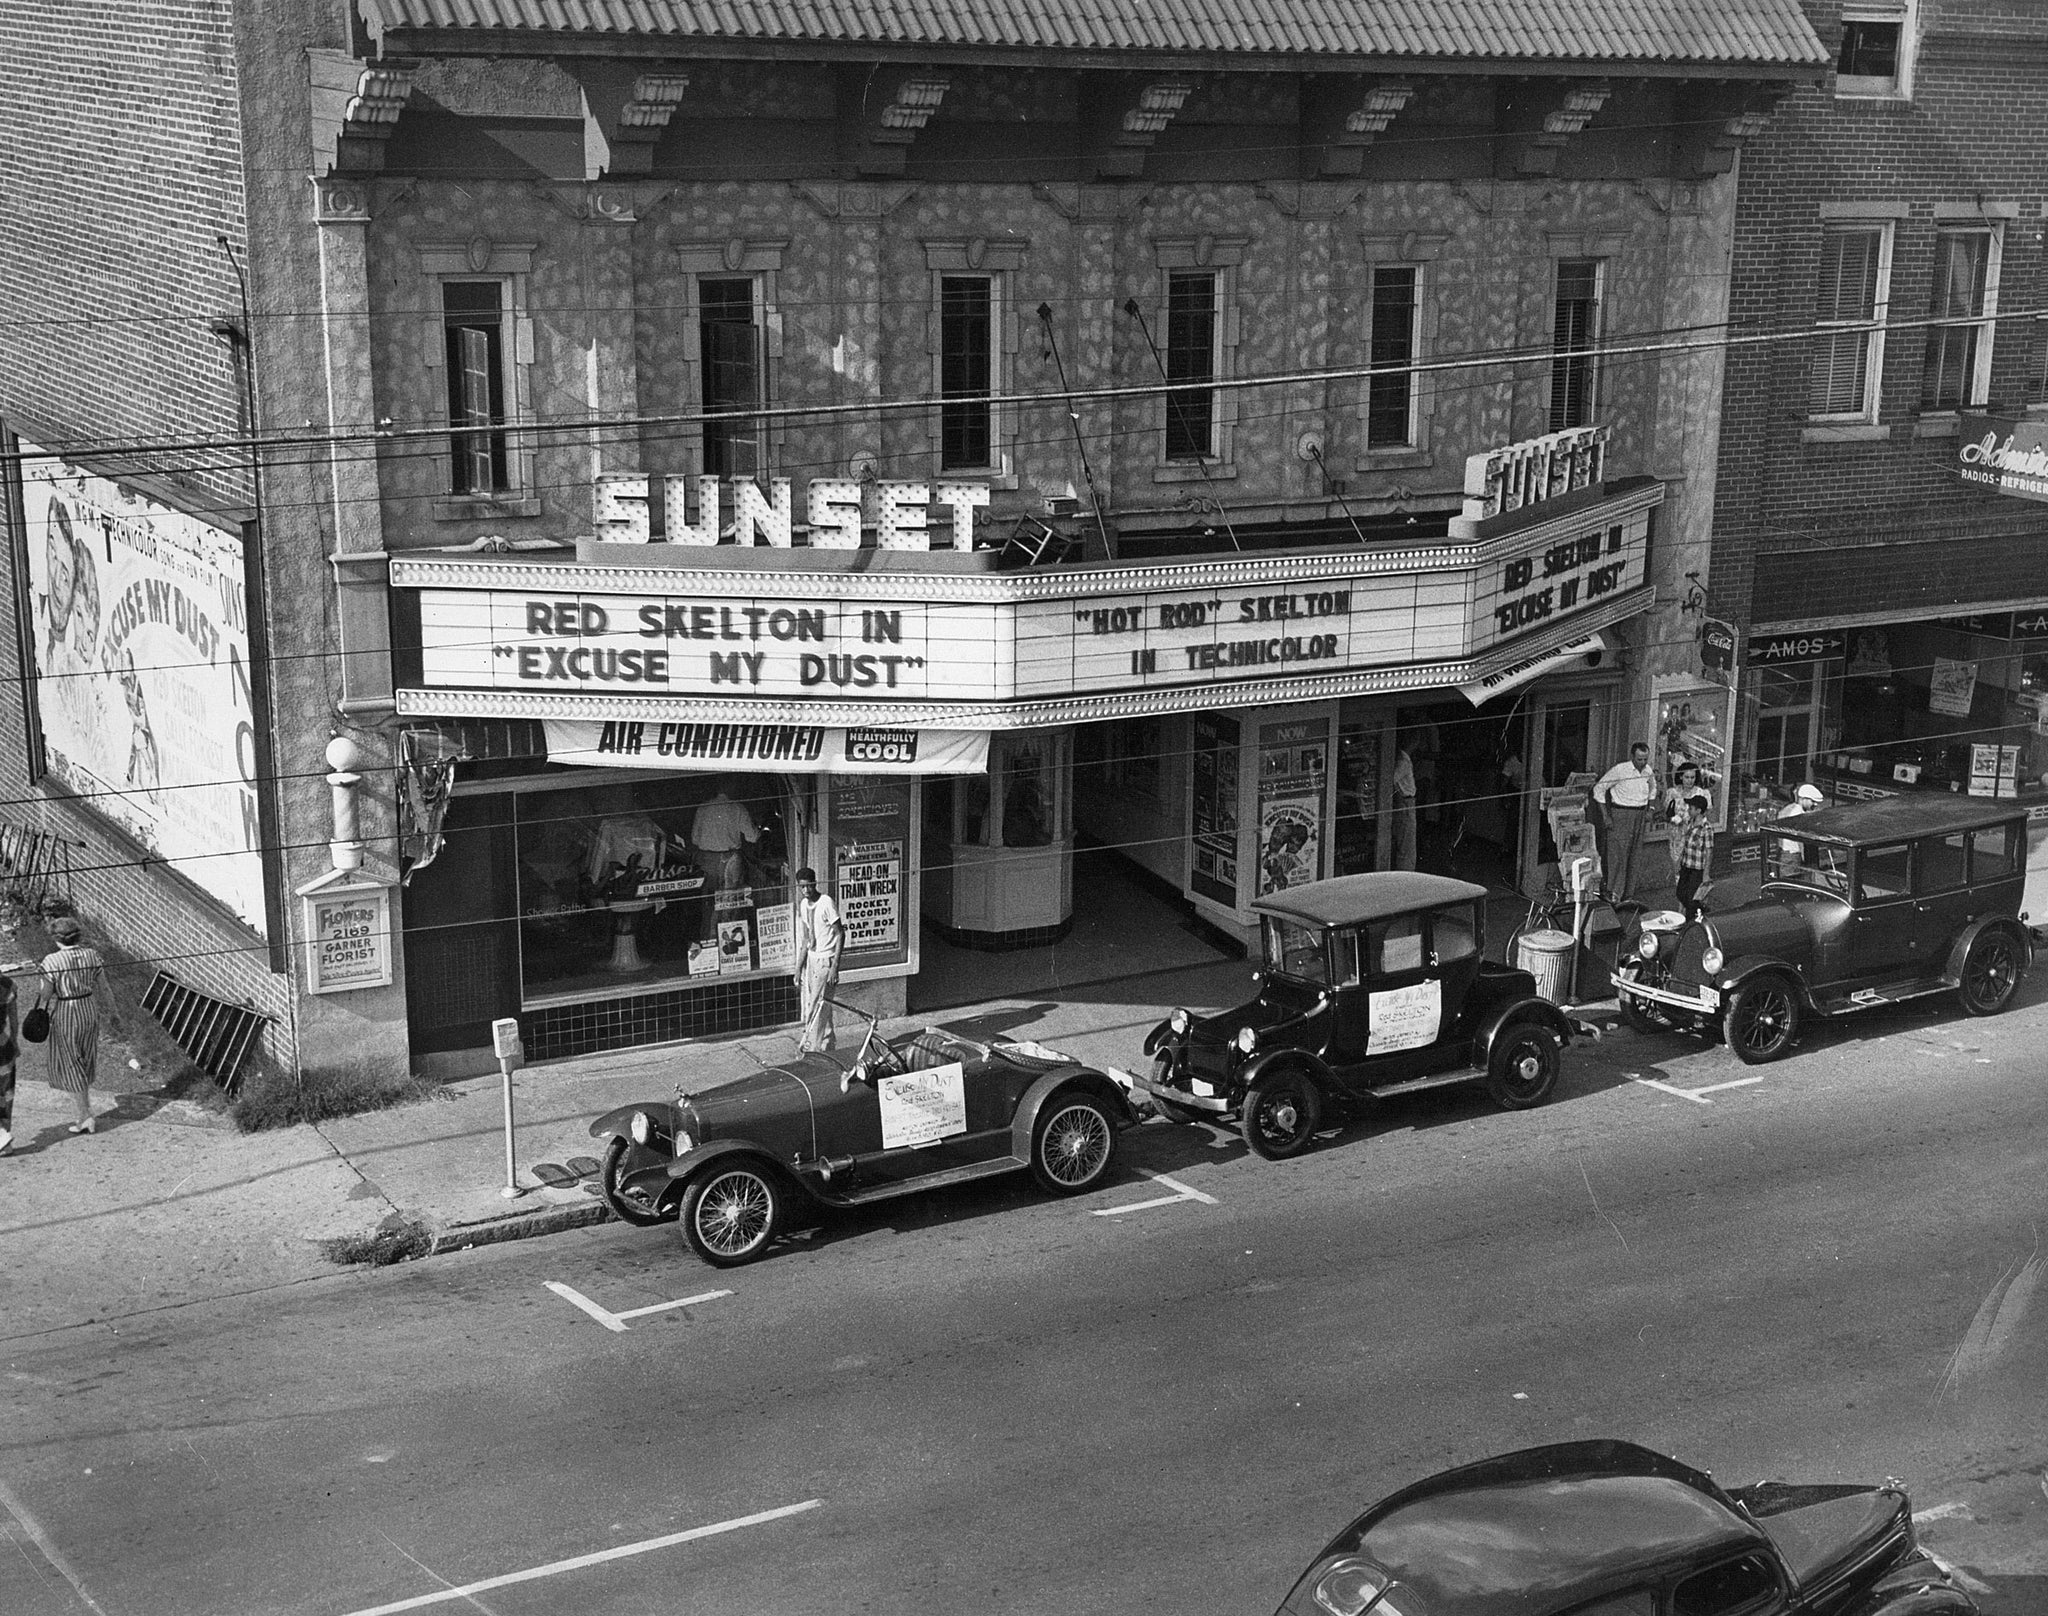 The Sunset Theatre marquee advertising the Red Skelton films "Excuse My Dust" and "Hot Rod," Asheboro, circa 1951. -- Courtesy of the Randolph County Public Library